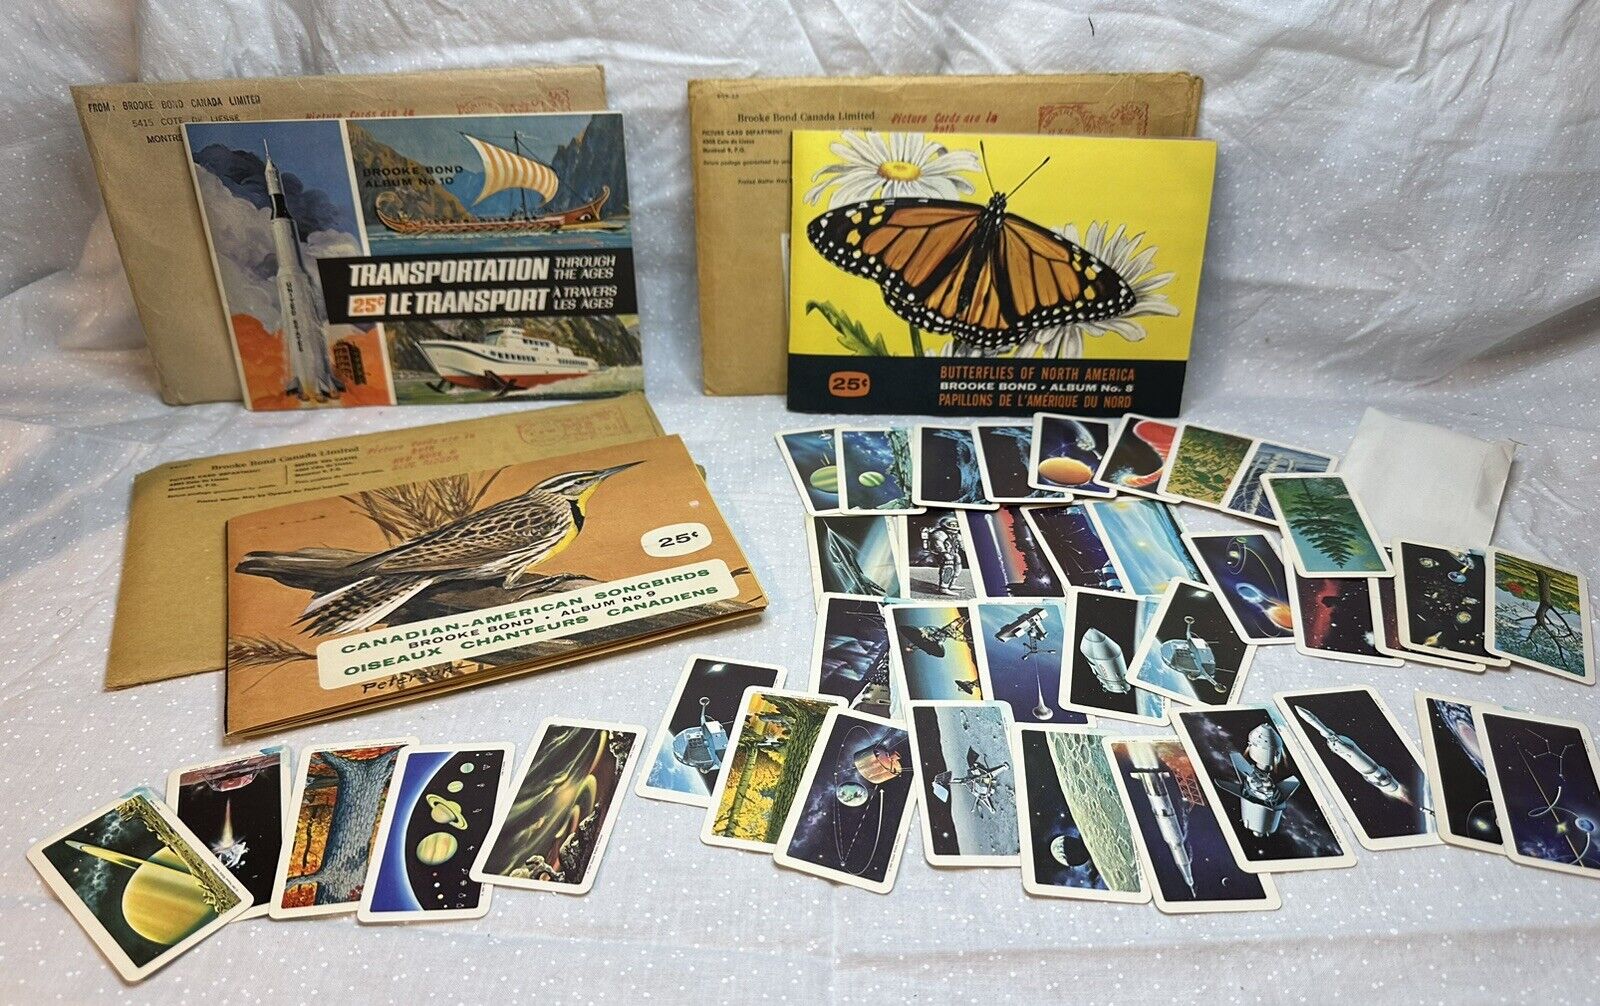 BROOKE BOND ALBUMS PLUS 40 EXTRA CARDS AS SEEN IN PHOTOS